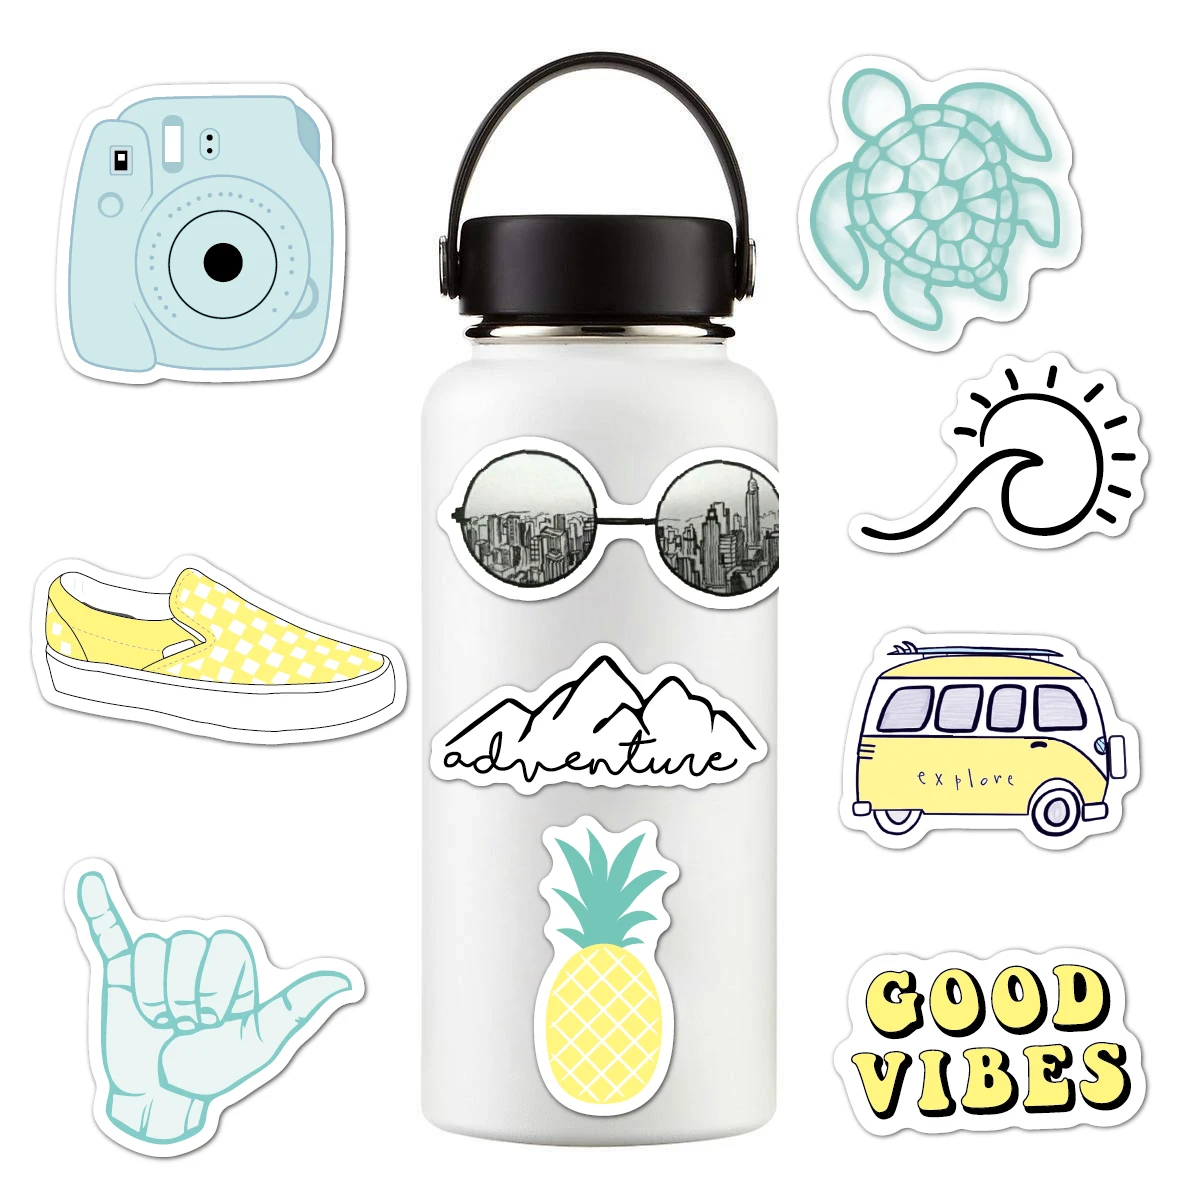 Cute Waterproof Vinyl Stickers for Teens and Girls.Unique Cool Durable Decal Stickers VSCO Water Bottle Stickers Laptop Aesthetic and Trendy 30 Pack Stickers for Water Bottles Phone. 